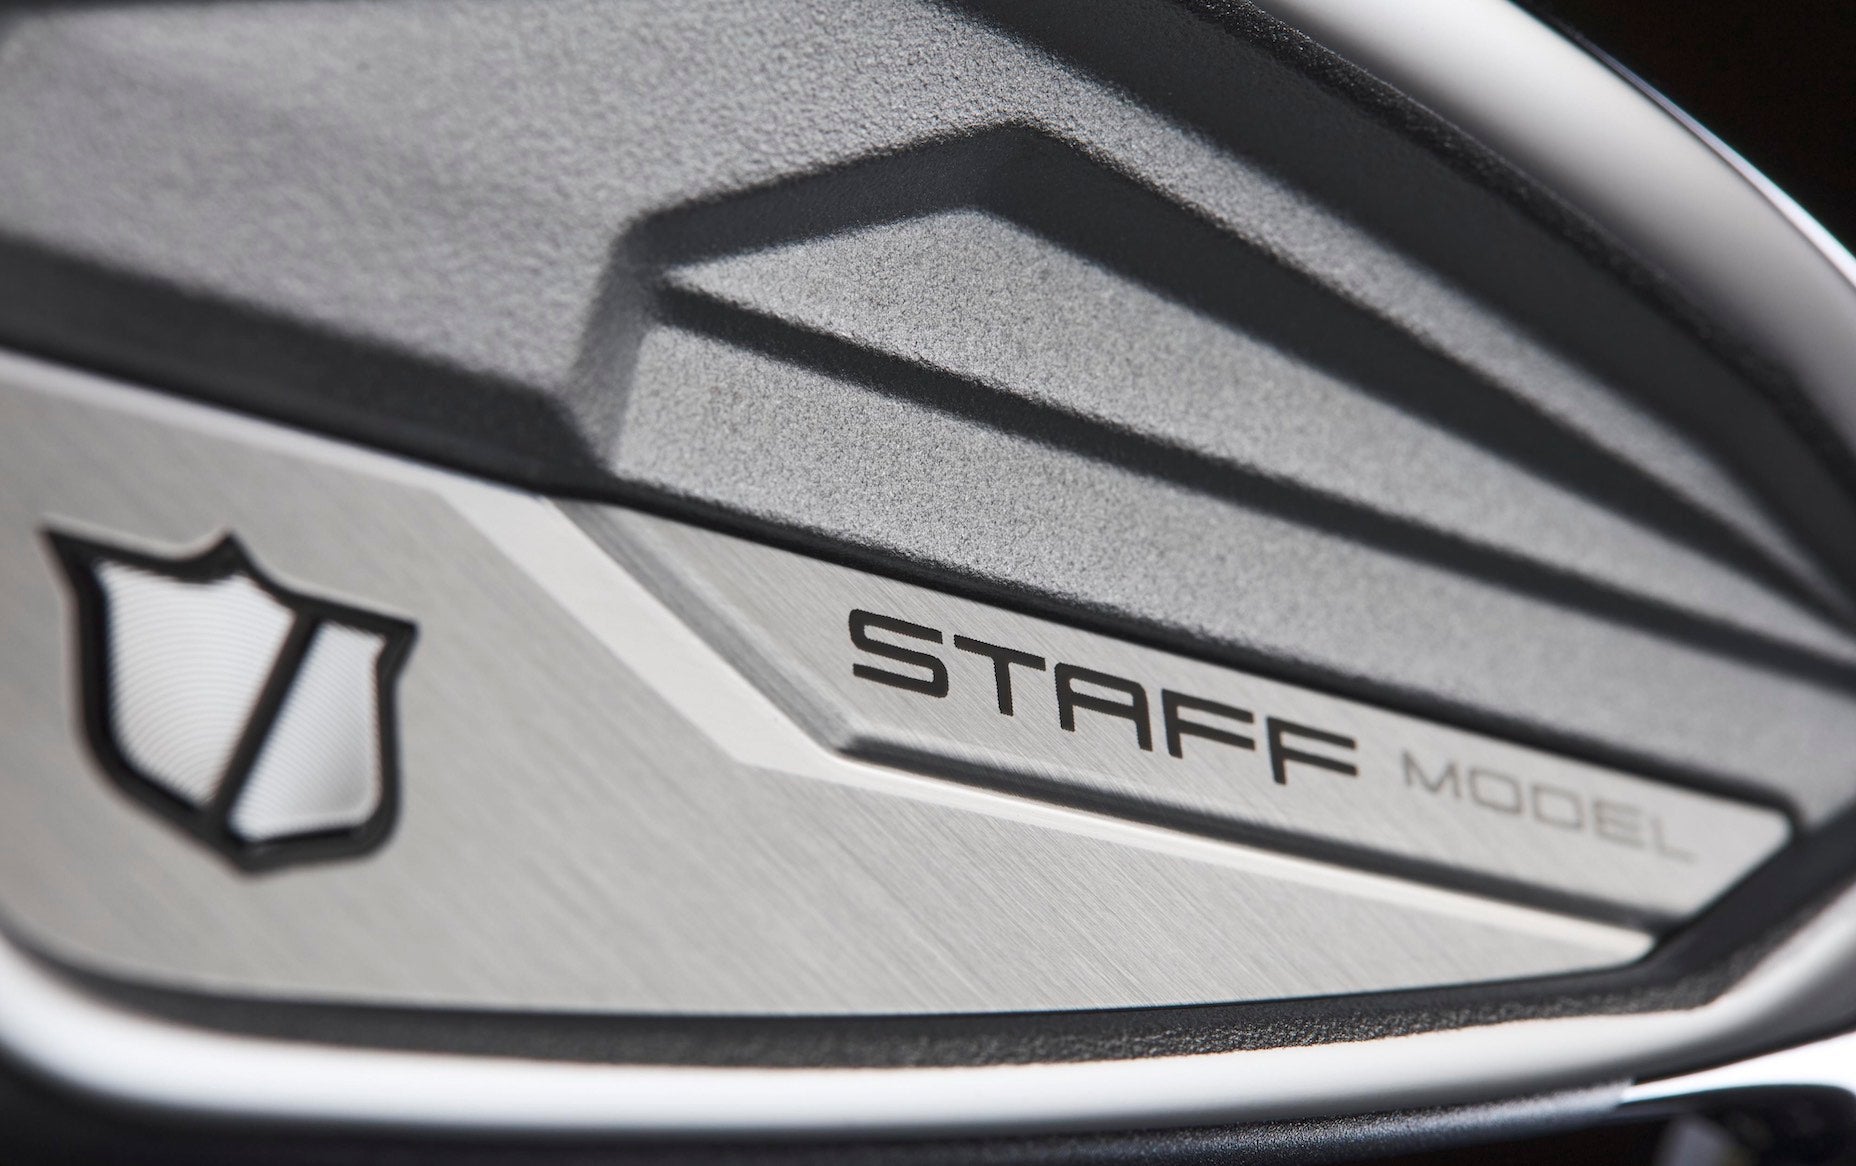 Wilson Staff Model Blades, CB irons Everything you need to know